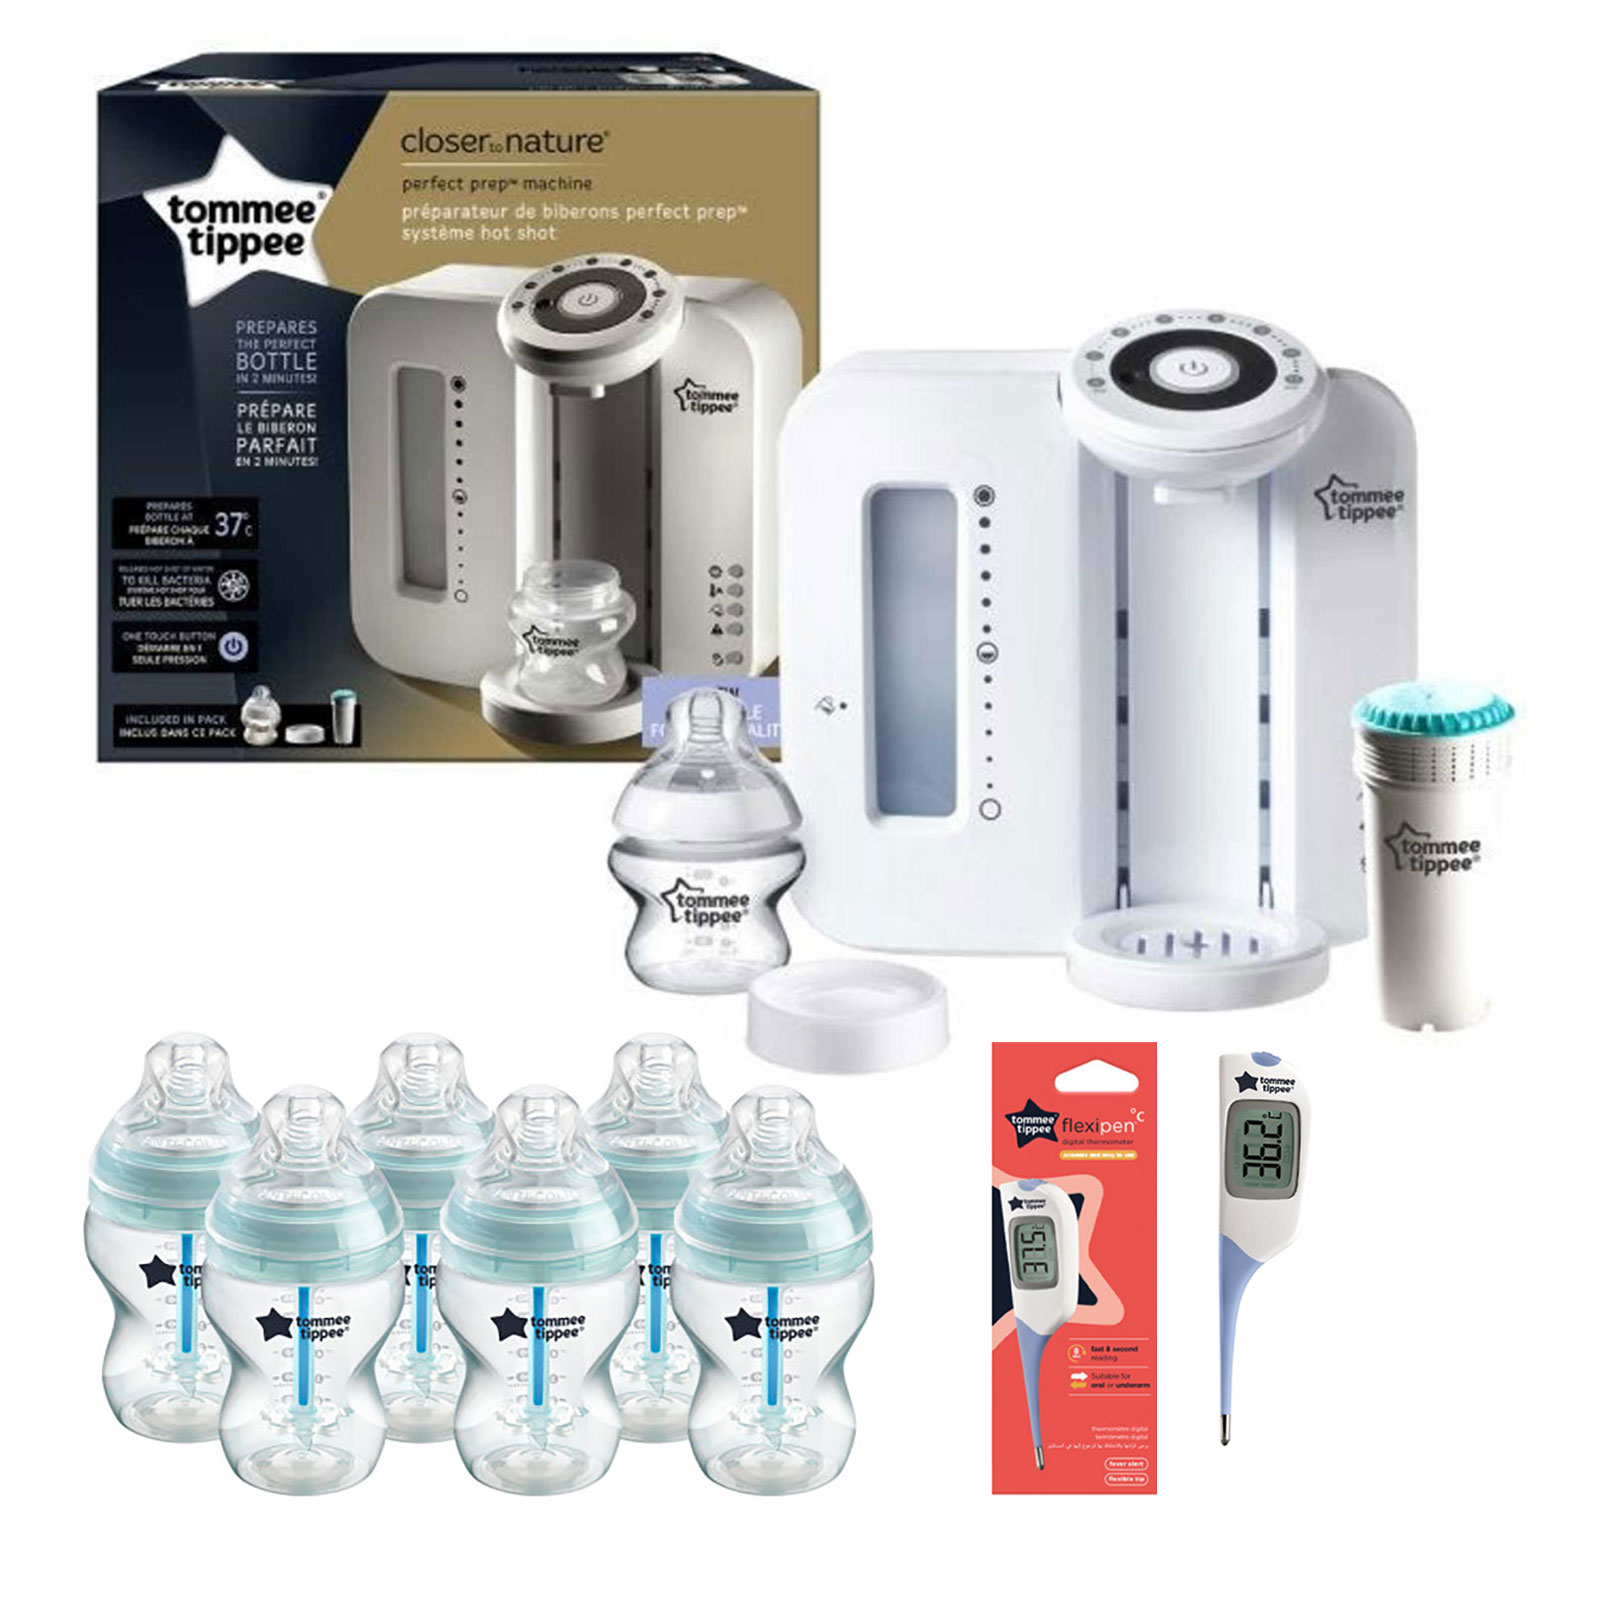 Tommee Tippee 9pc Perfect Prep Machine Anti-Colic Baby Bottle and Thermometer Feeding Bundle - White / Blue